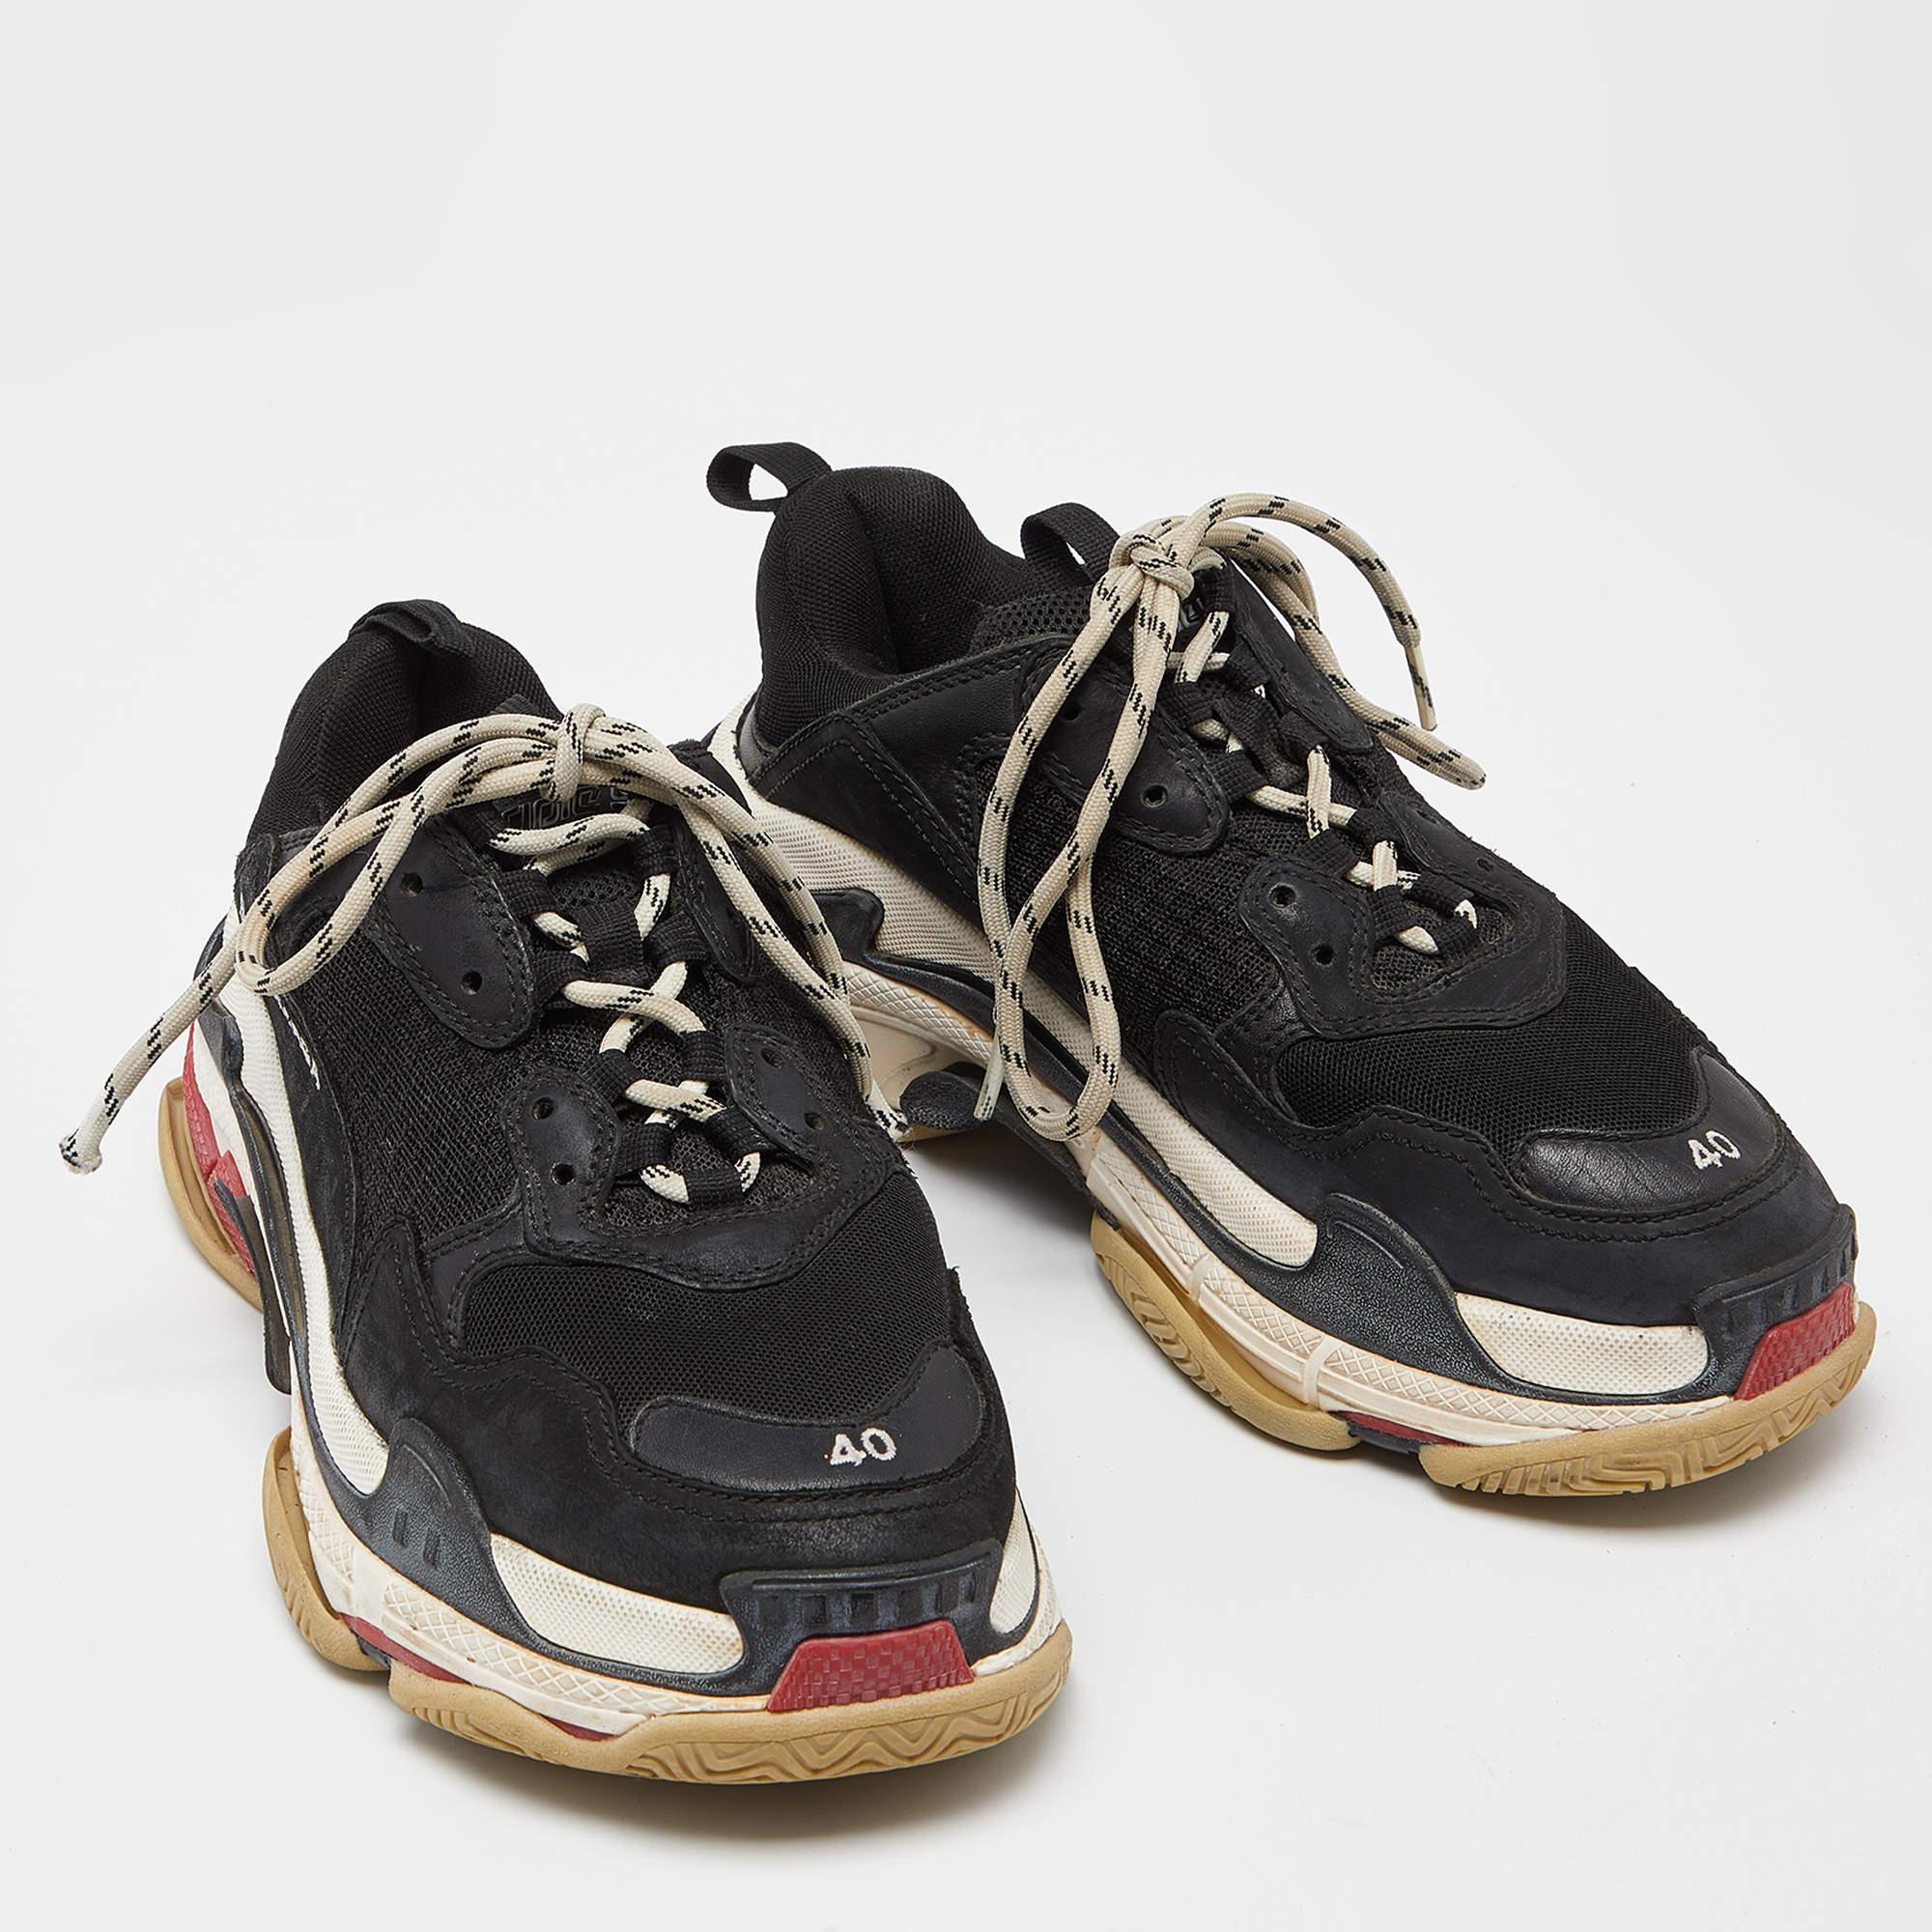 Balenciaga Black Leather and Mesh Triple S Sneakers Size 40 For Sale 1